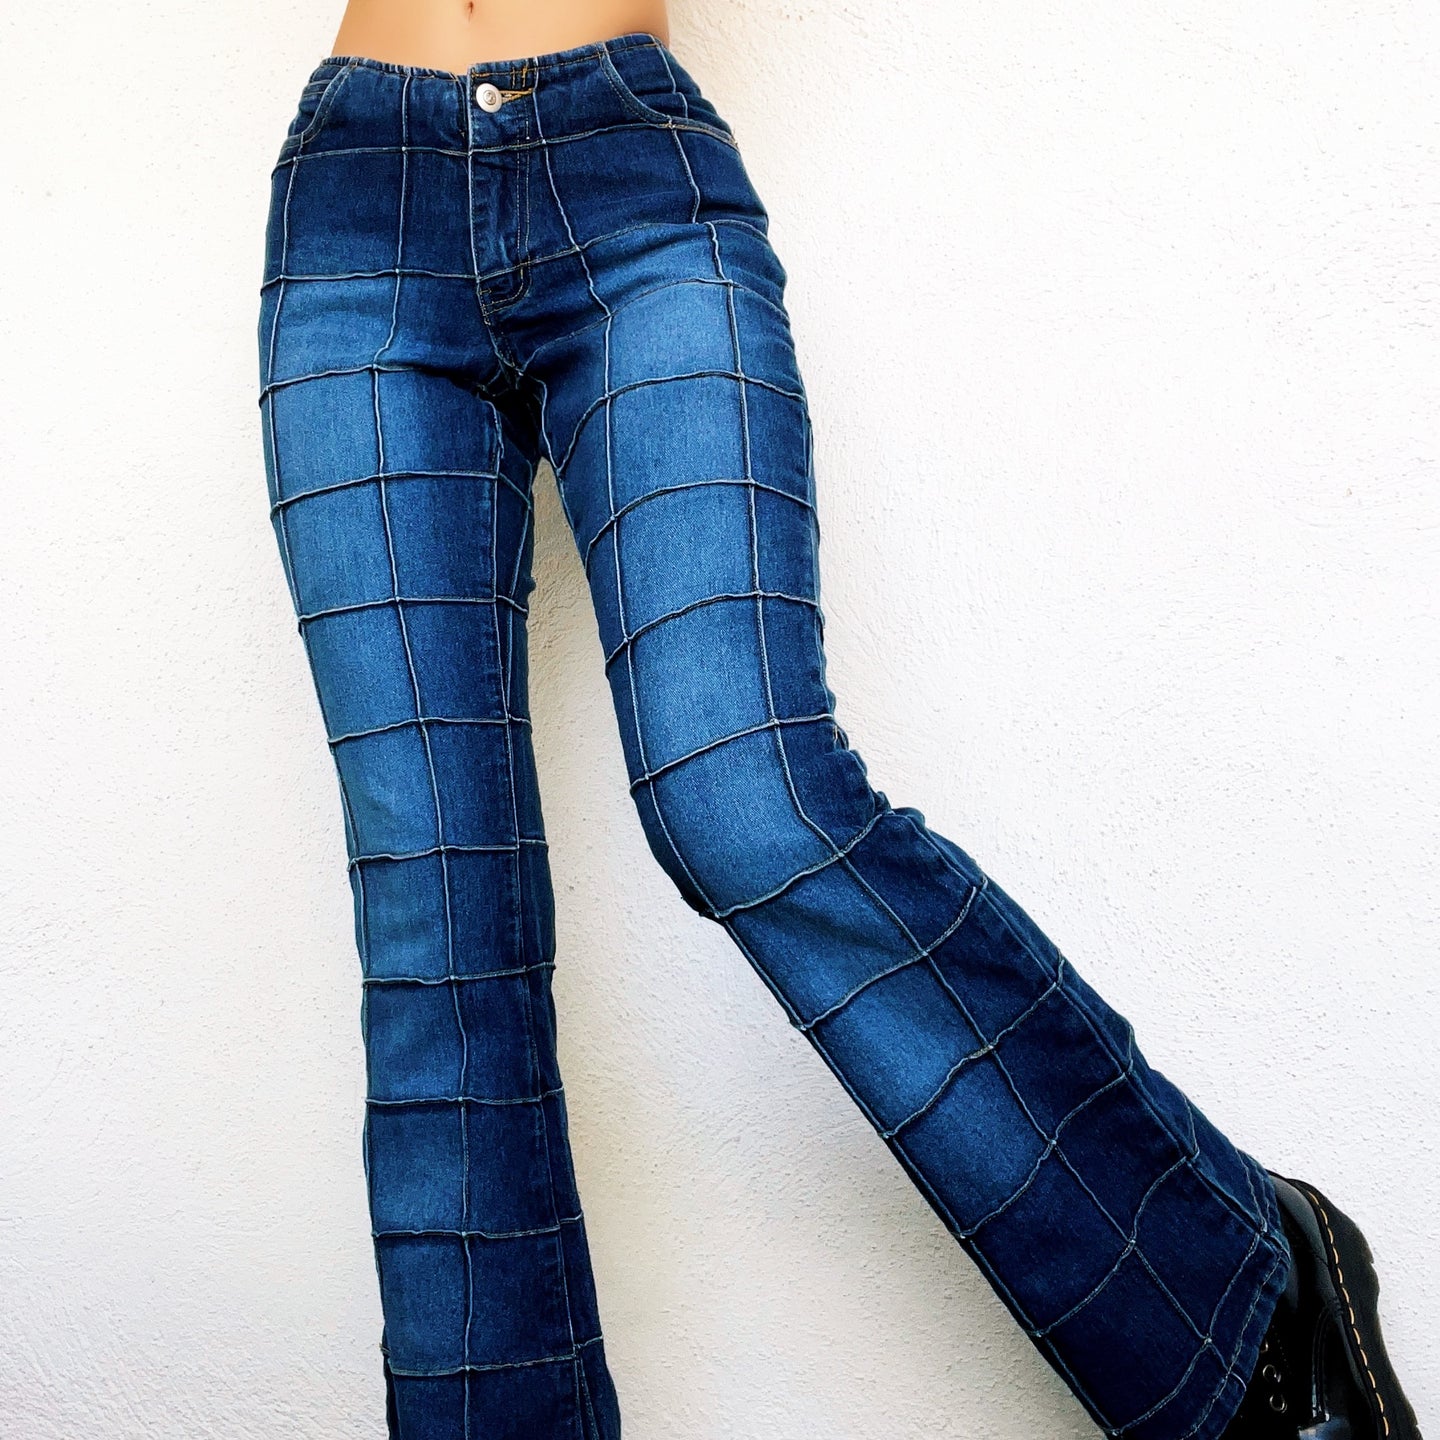 Early 2000s Grid Jeans